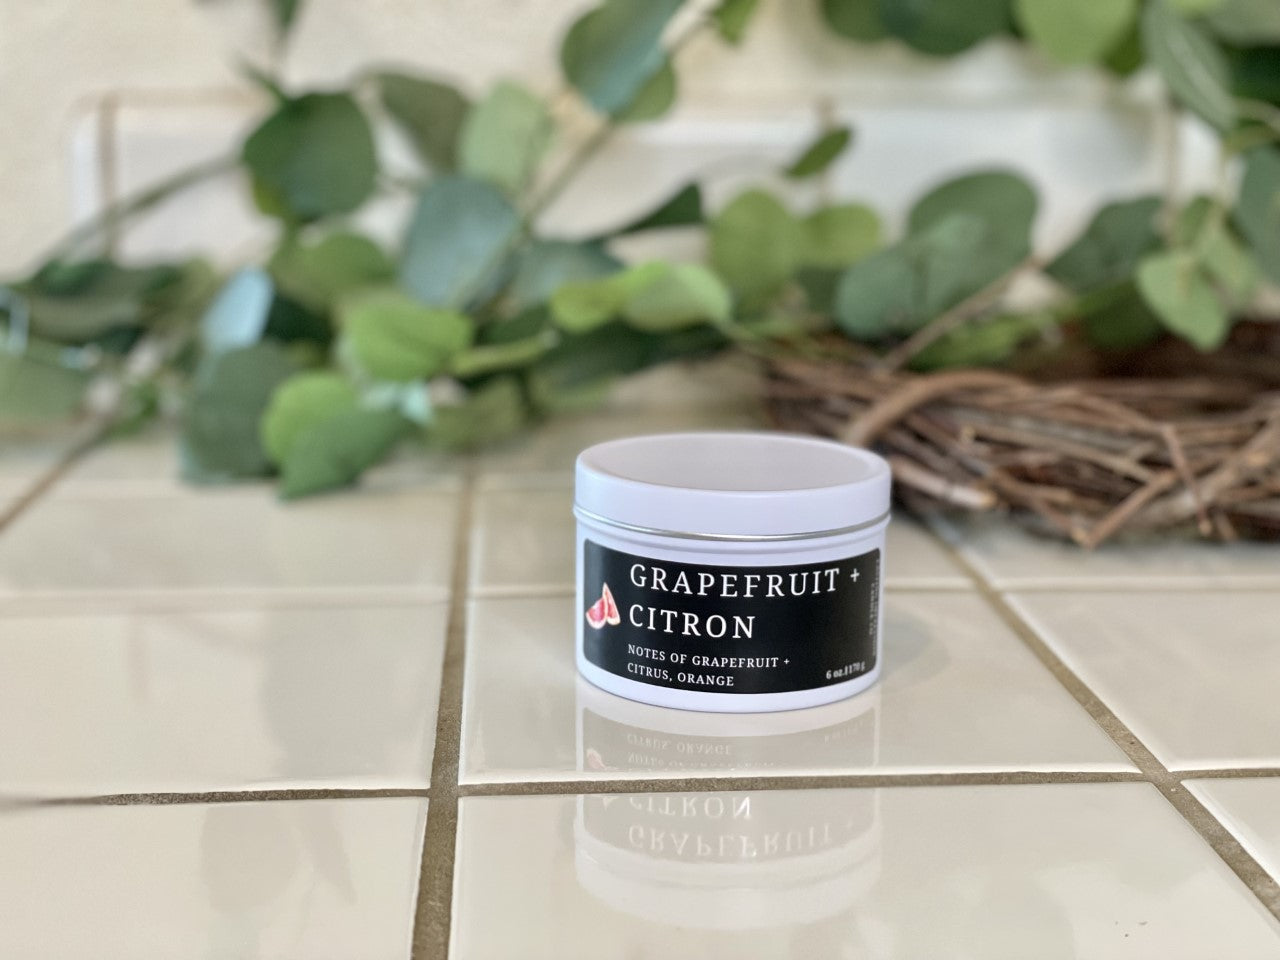 Grapefruit + Citron Scented | Pure Soy Candle